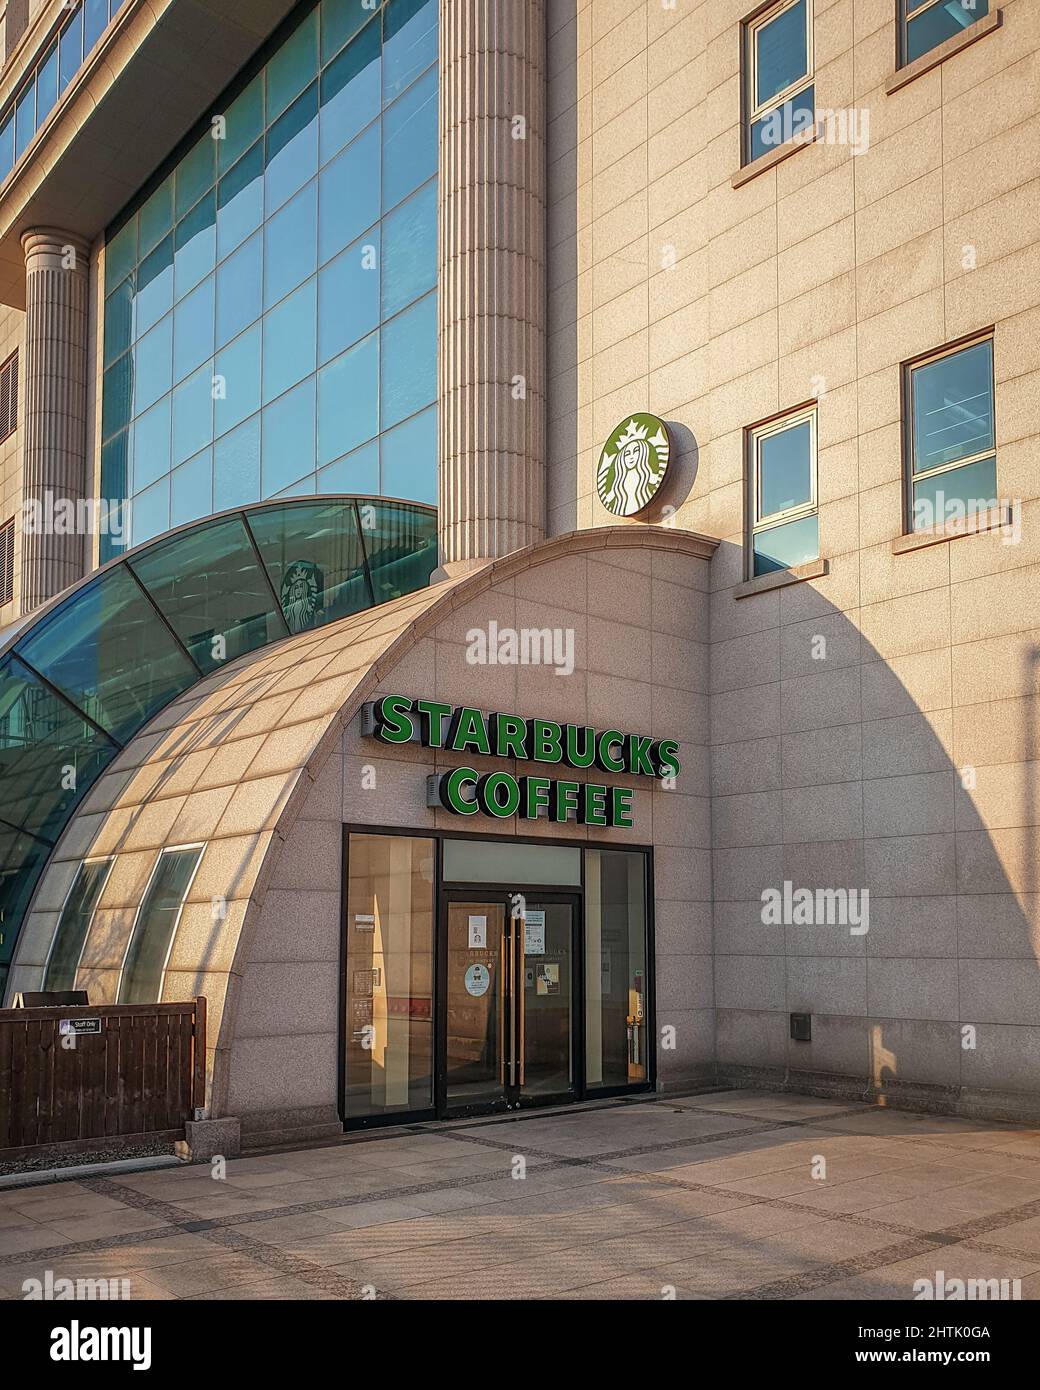 Ulsan, South Korea - Starbucks coffee store located at the Hyundai Department Store. The largest coffeehouse company in the world. Stock Photo